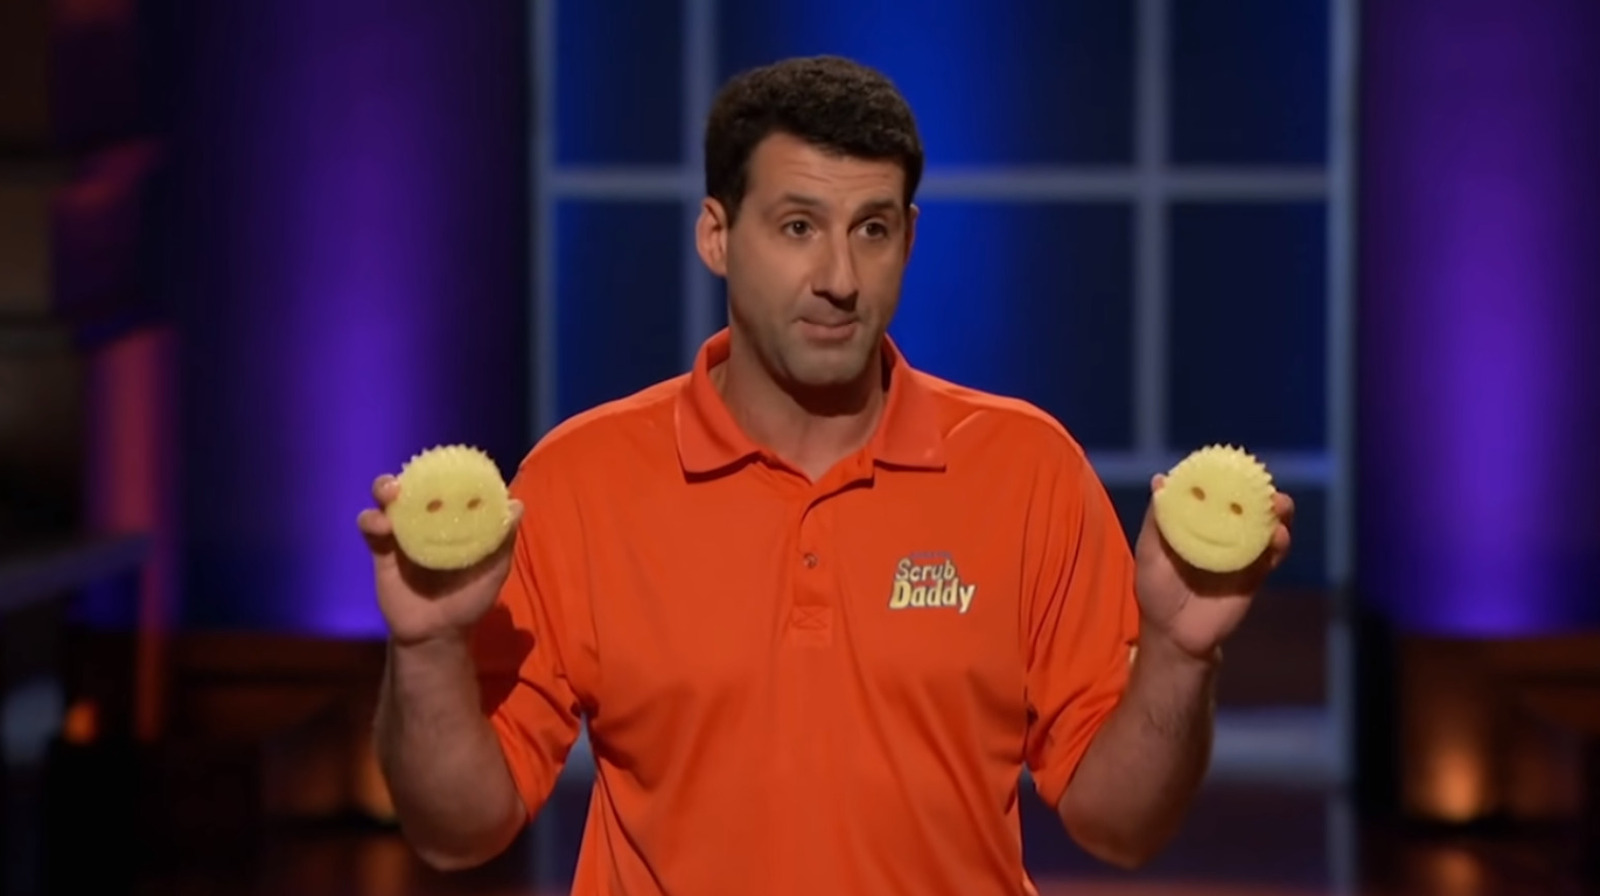 https://www.looper.com/img/gallery/whatever-happened-to-scrub-daddy-after-shark-tank/l-intro-1682530720.jpg